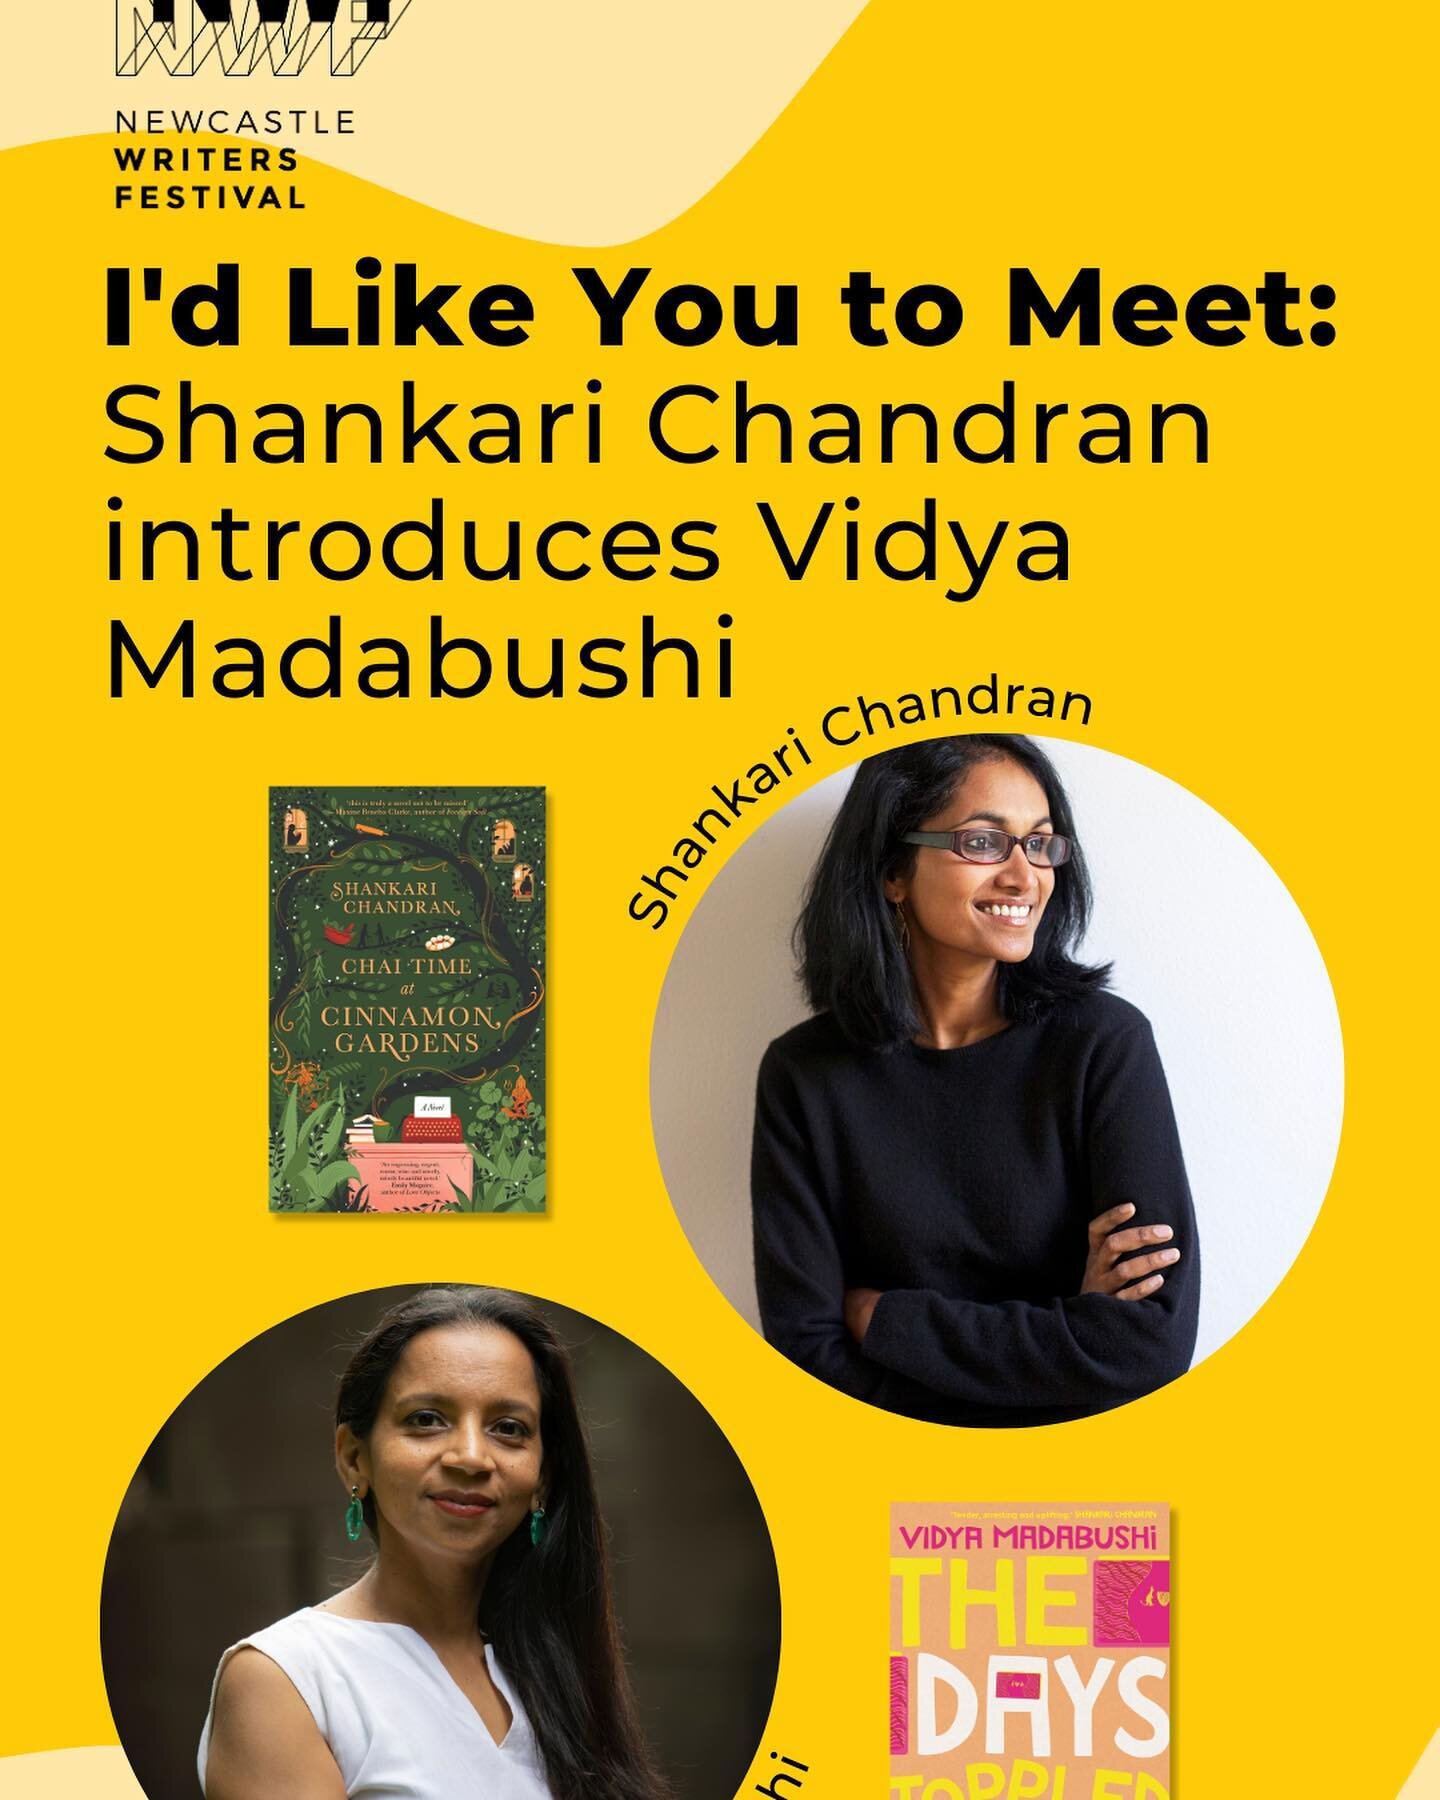 I&rsquo;m beyond thrilled to be a part of the Newcastle Writers festival (https://www.newcastlewritersfestival.org.au/events/) along with writers I so admire. I&rsquo;m super excited to talk to the incomparable Miles Franklin Winner @shankarichandran